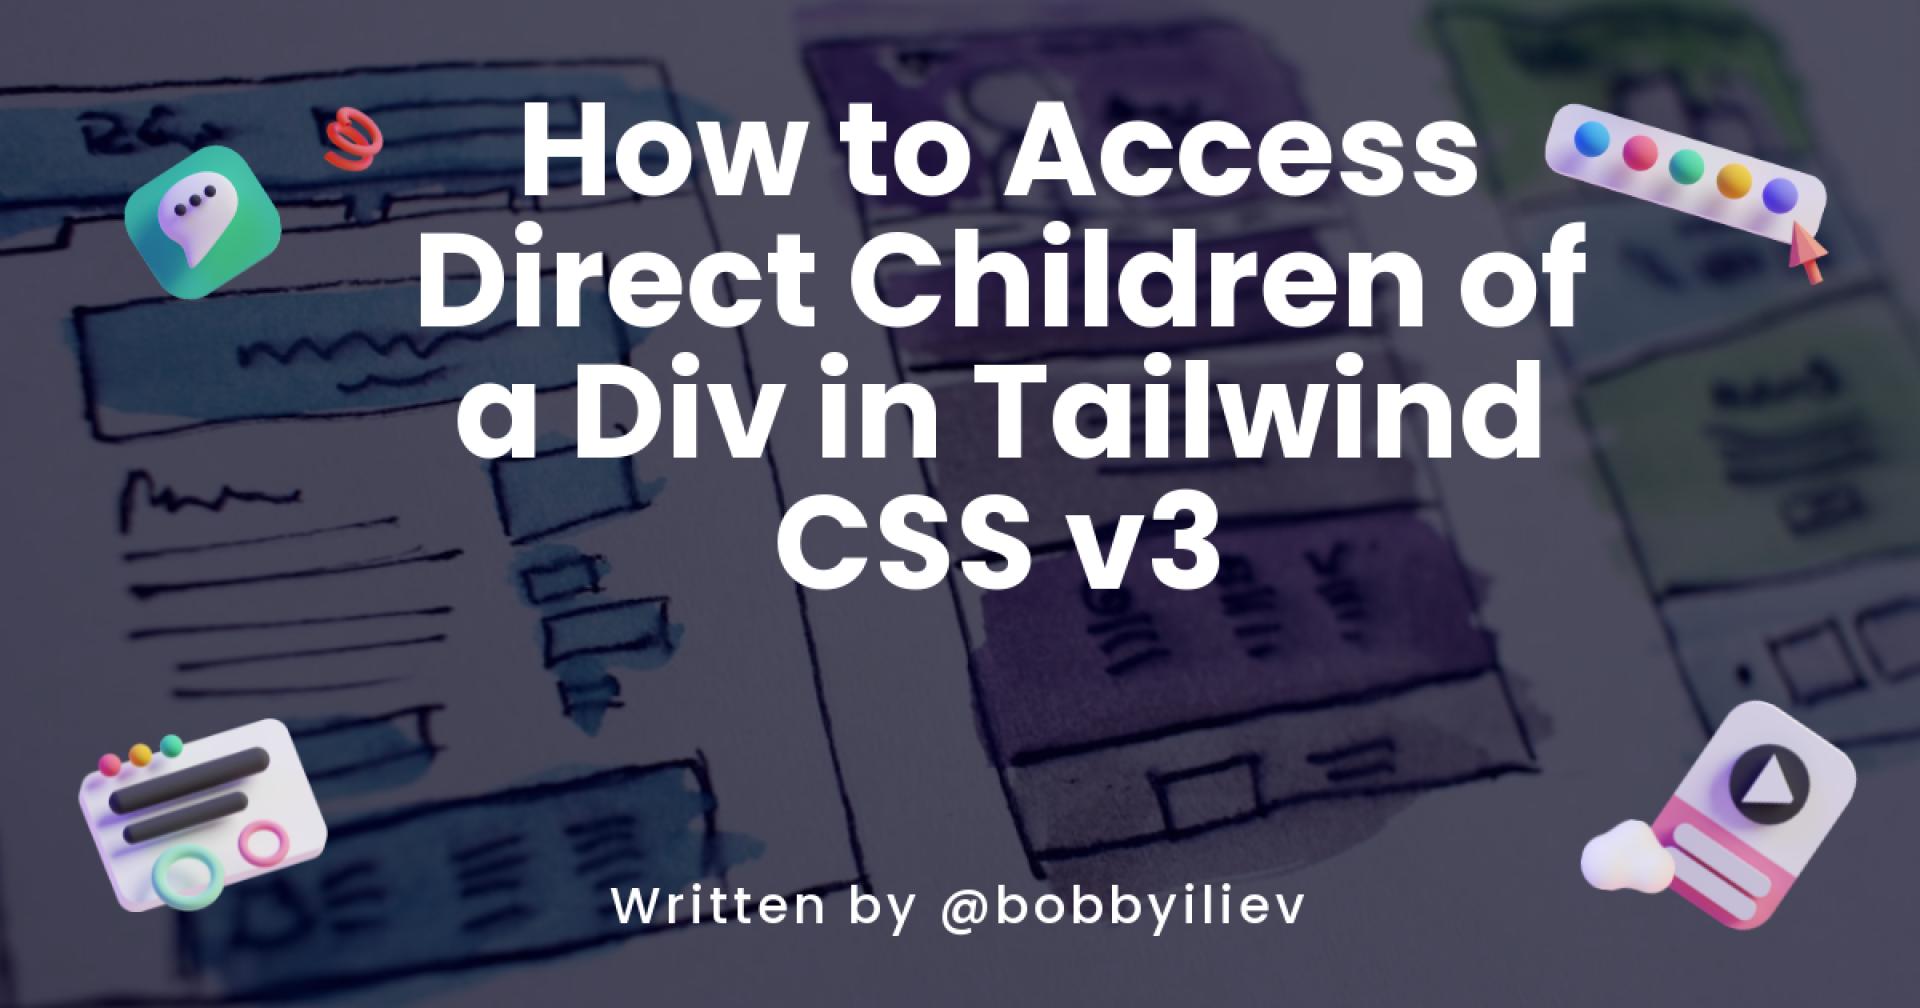 How to Access Direct Children of a Div in Tailwind CSS v3